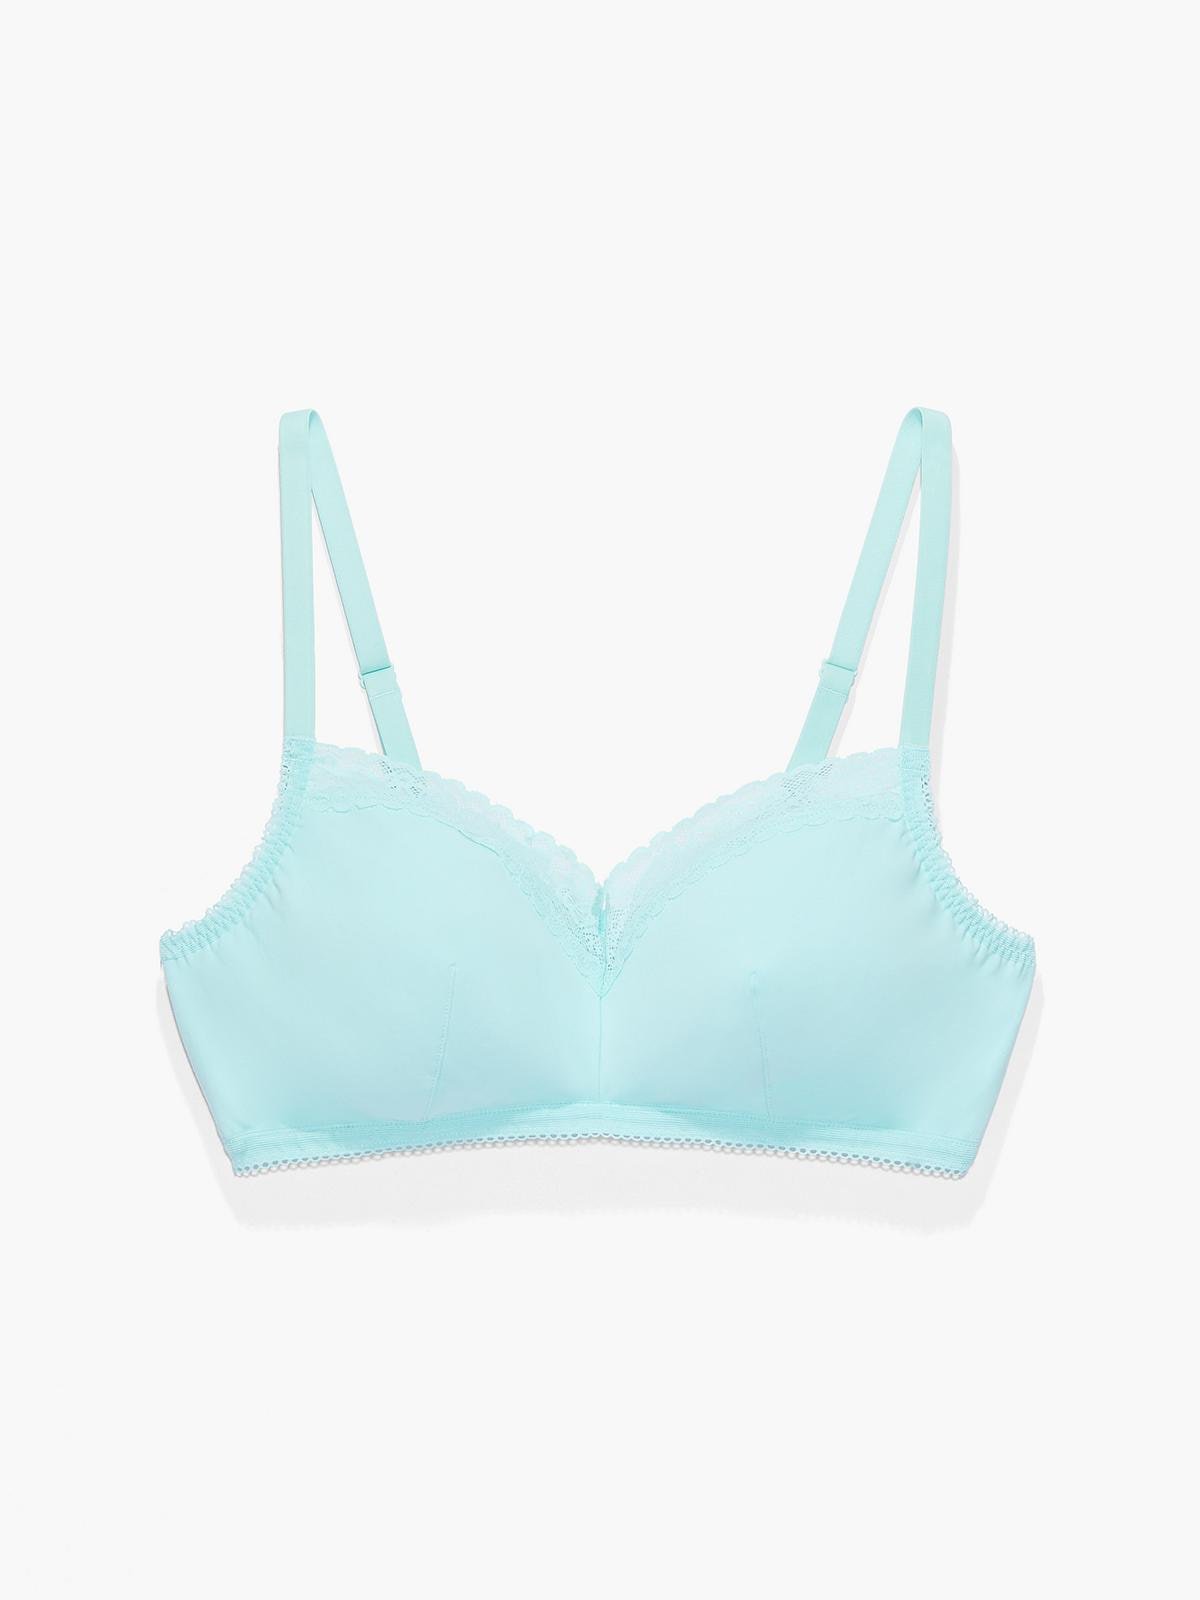 Savage x Fenty Floral Lace Racerback Bralette in Blue, We Found Love in  Savage x Fenty's First-Ever Bridal Drop — Shop the Pieces Right Now